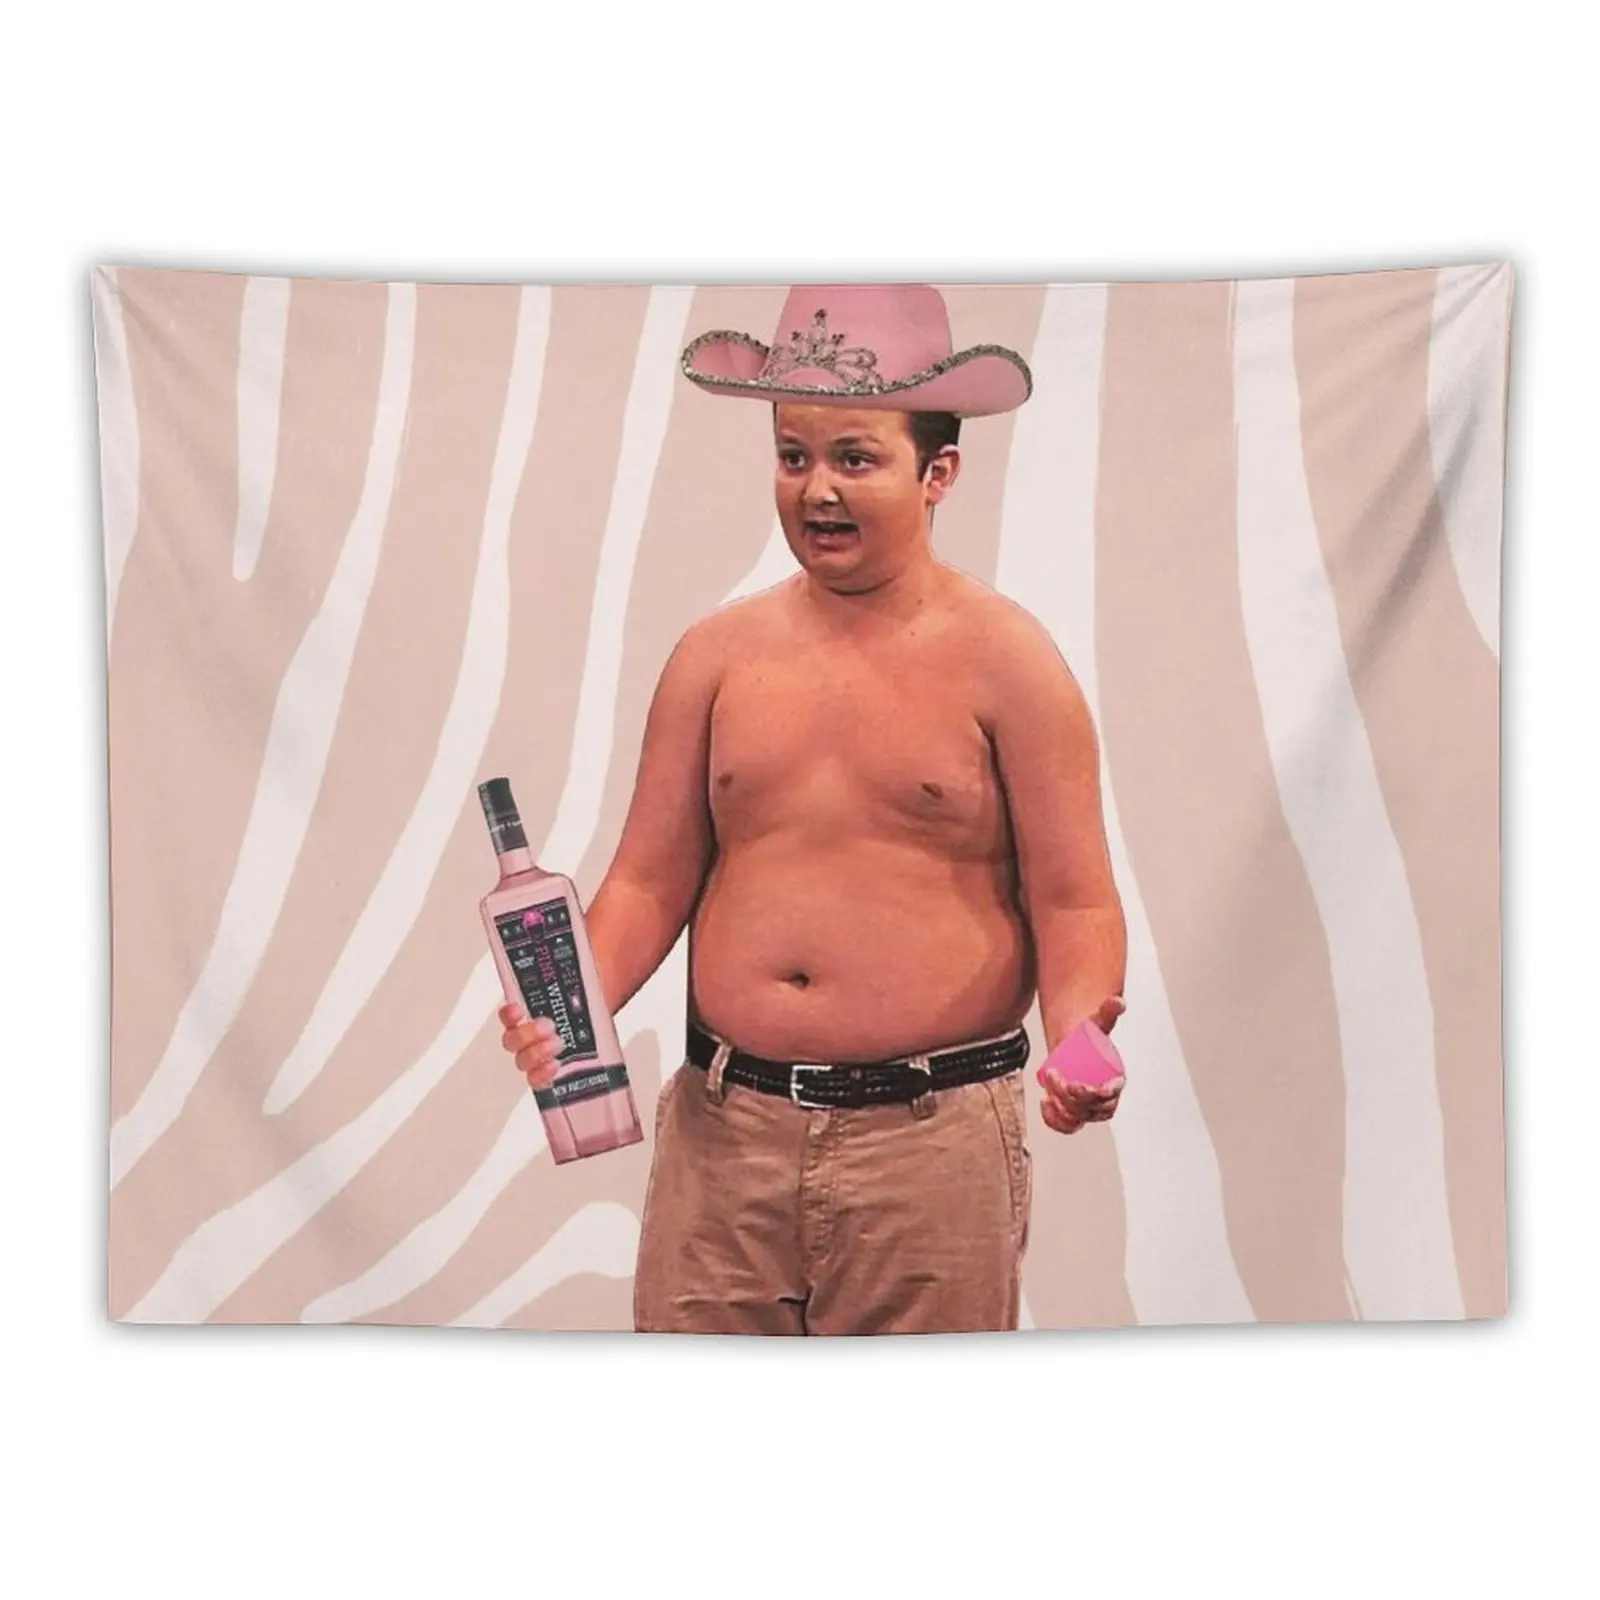 

gibby pink whitney Tapestry Home Decorations Aesthetic For Bedroom Things To Decorate The Room Tapestry